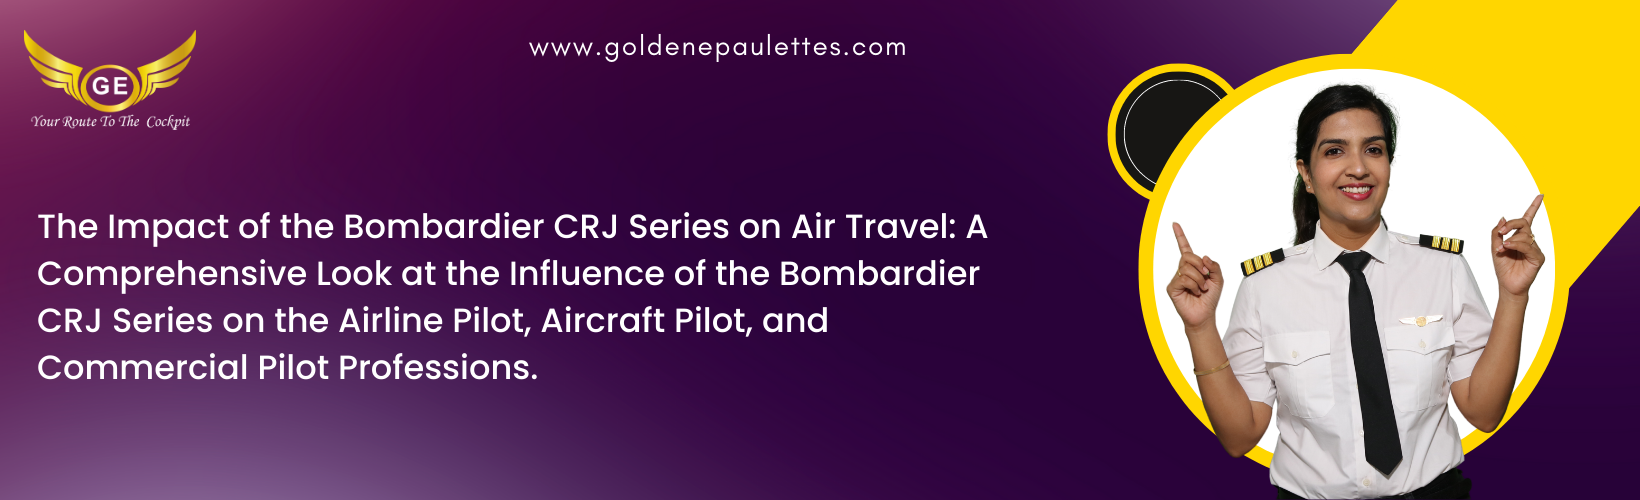 19.The Impact of the Bombardier CRJ Series on Air Travel